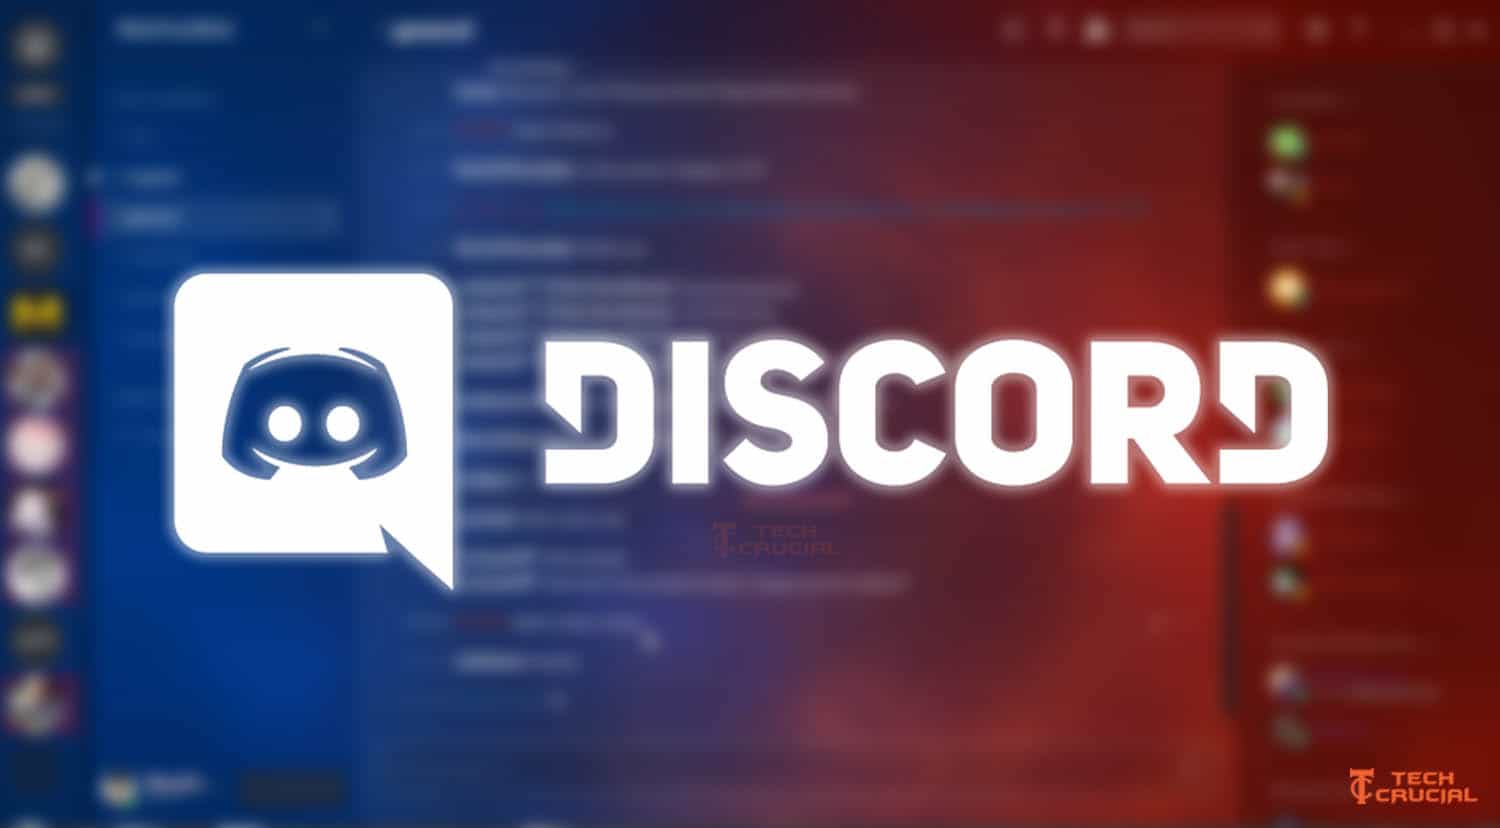 How To Unban Someone On Discord In Just 1 Minute